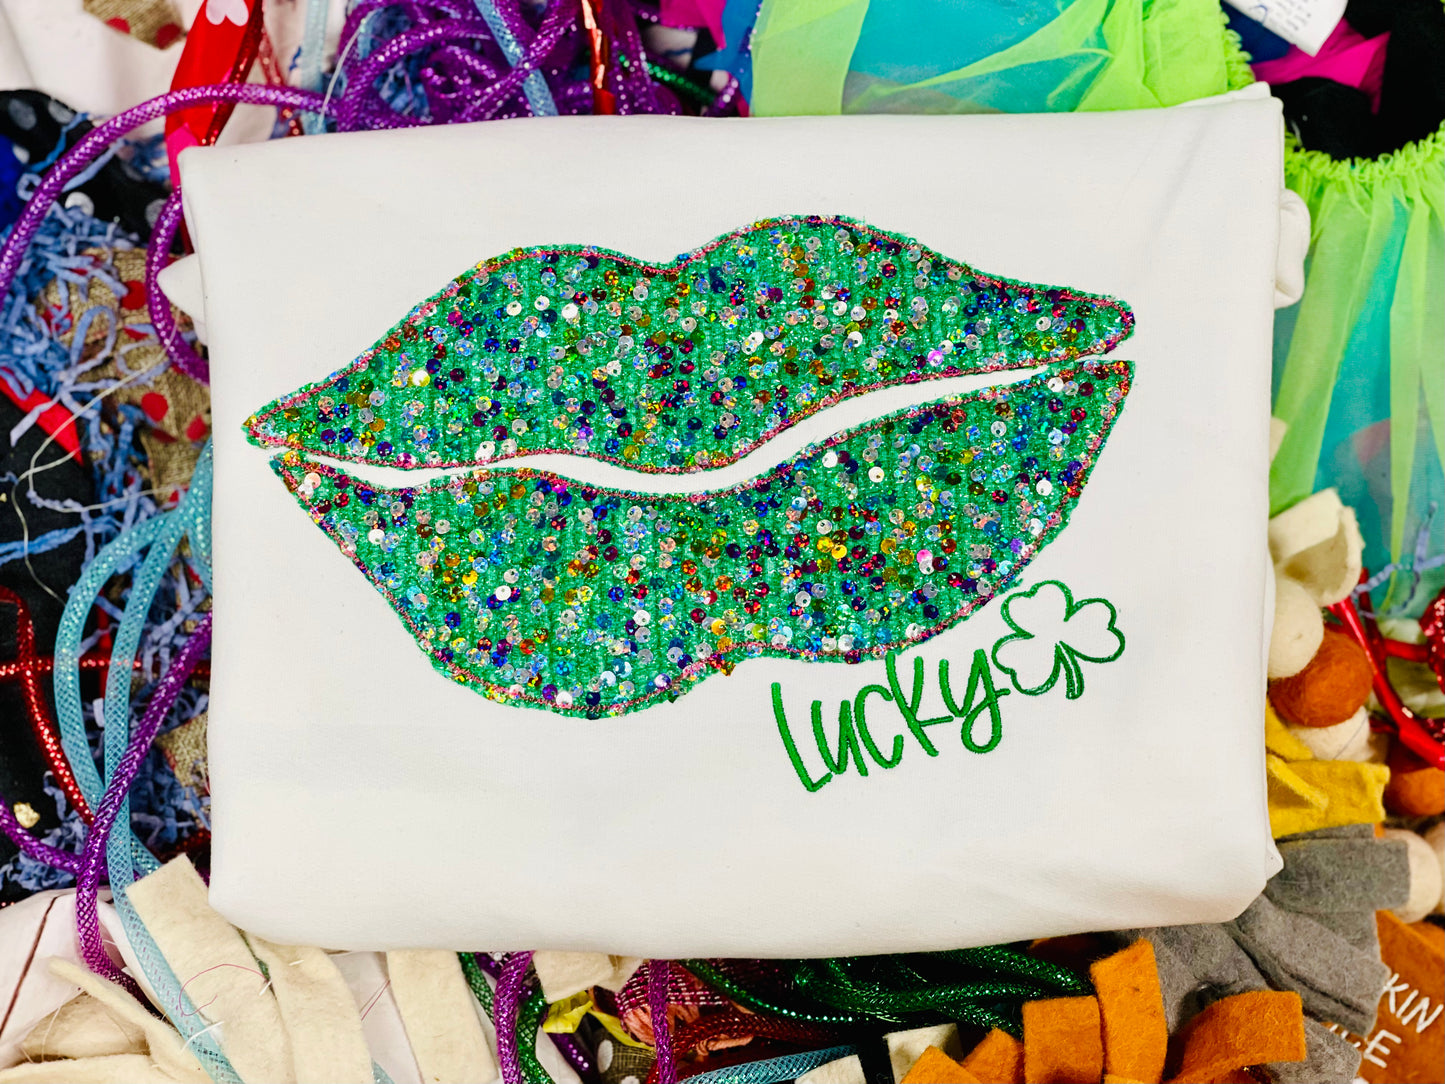 Embroidered Sequin Lips Tee or Sweatshirt wit Green Sequin Fabric, St. Patrick’s Day